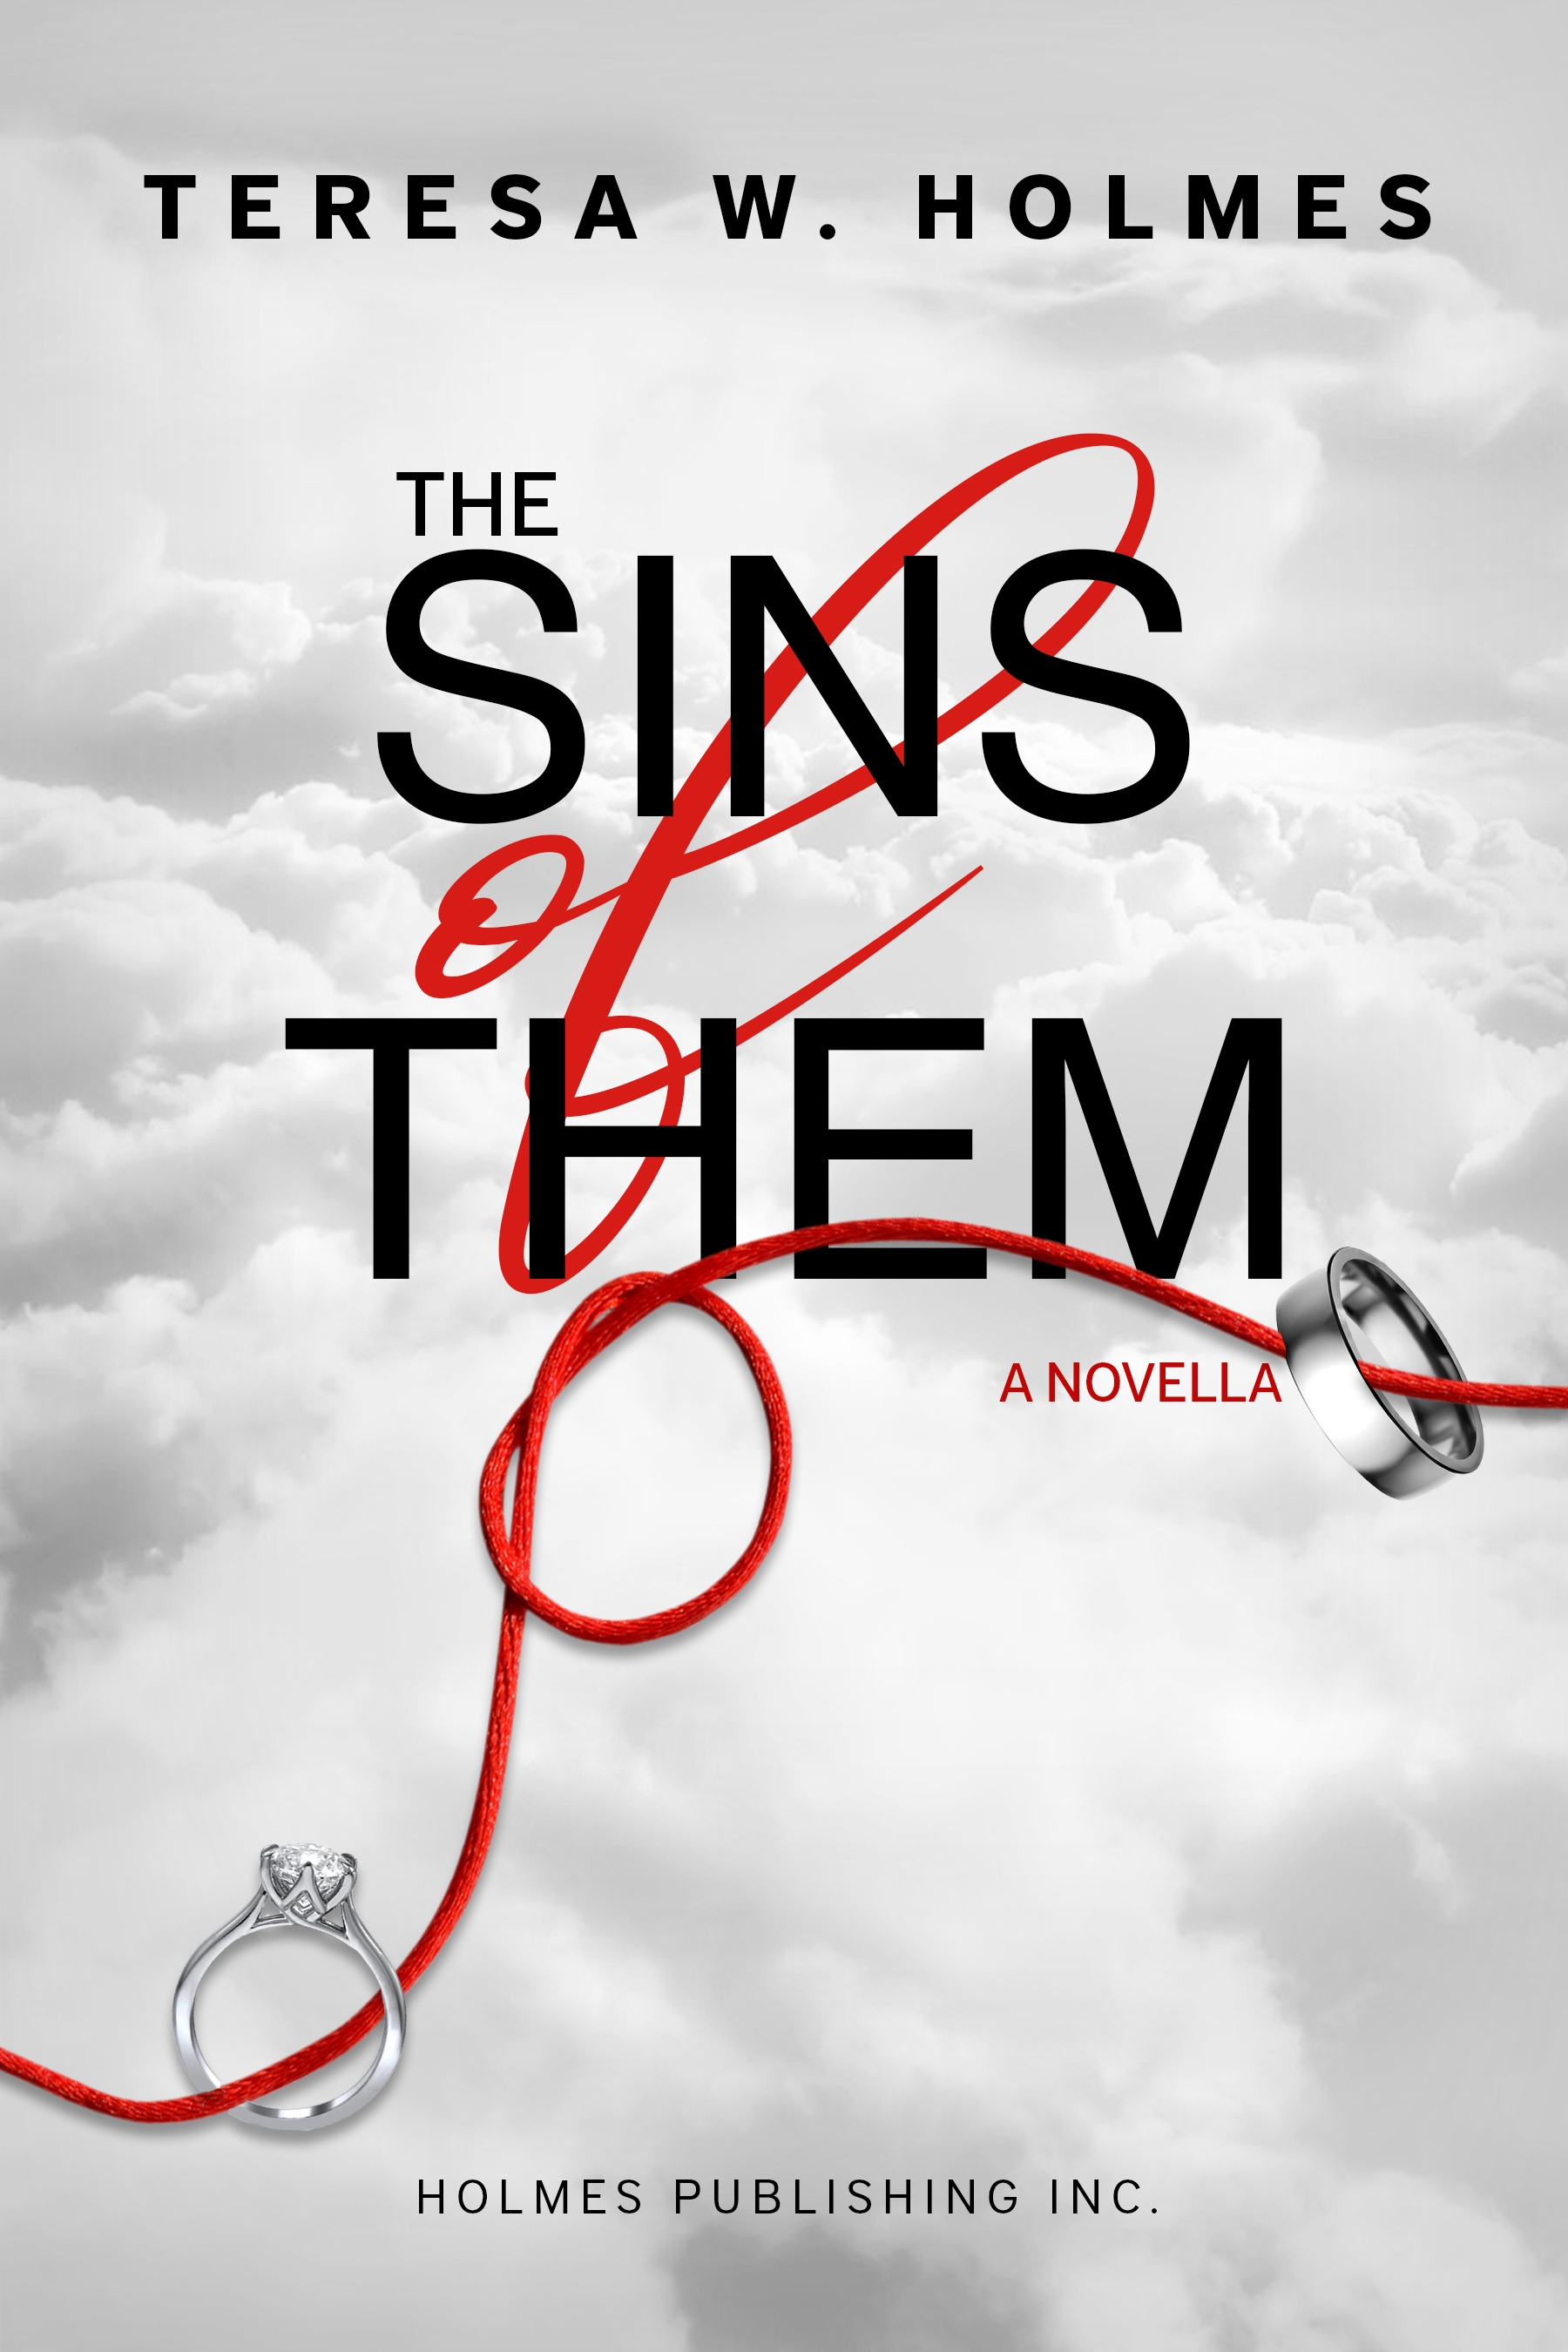 Author Teresa W. Holmes is Releasing a New Romance Novella on August 31, 2021 Titled, "The Sins of Them"